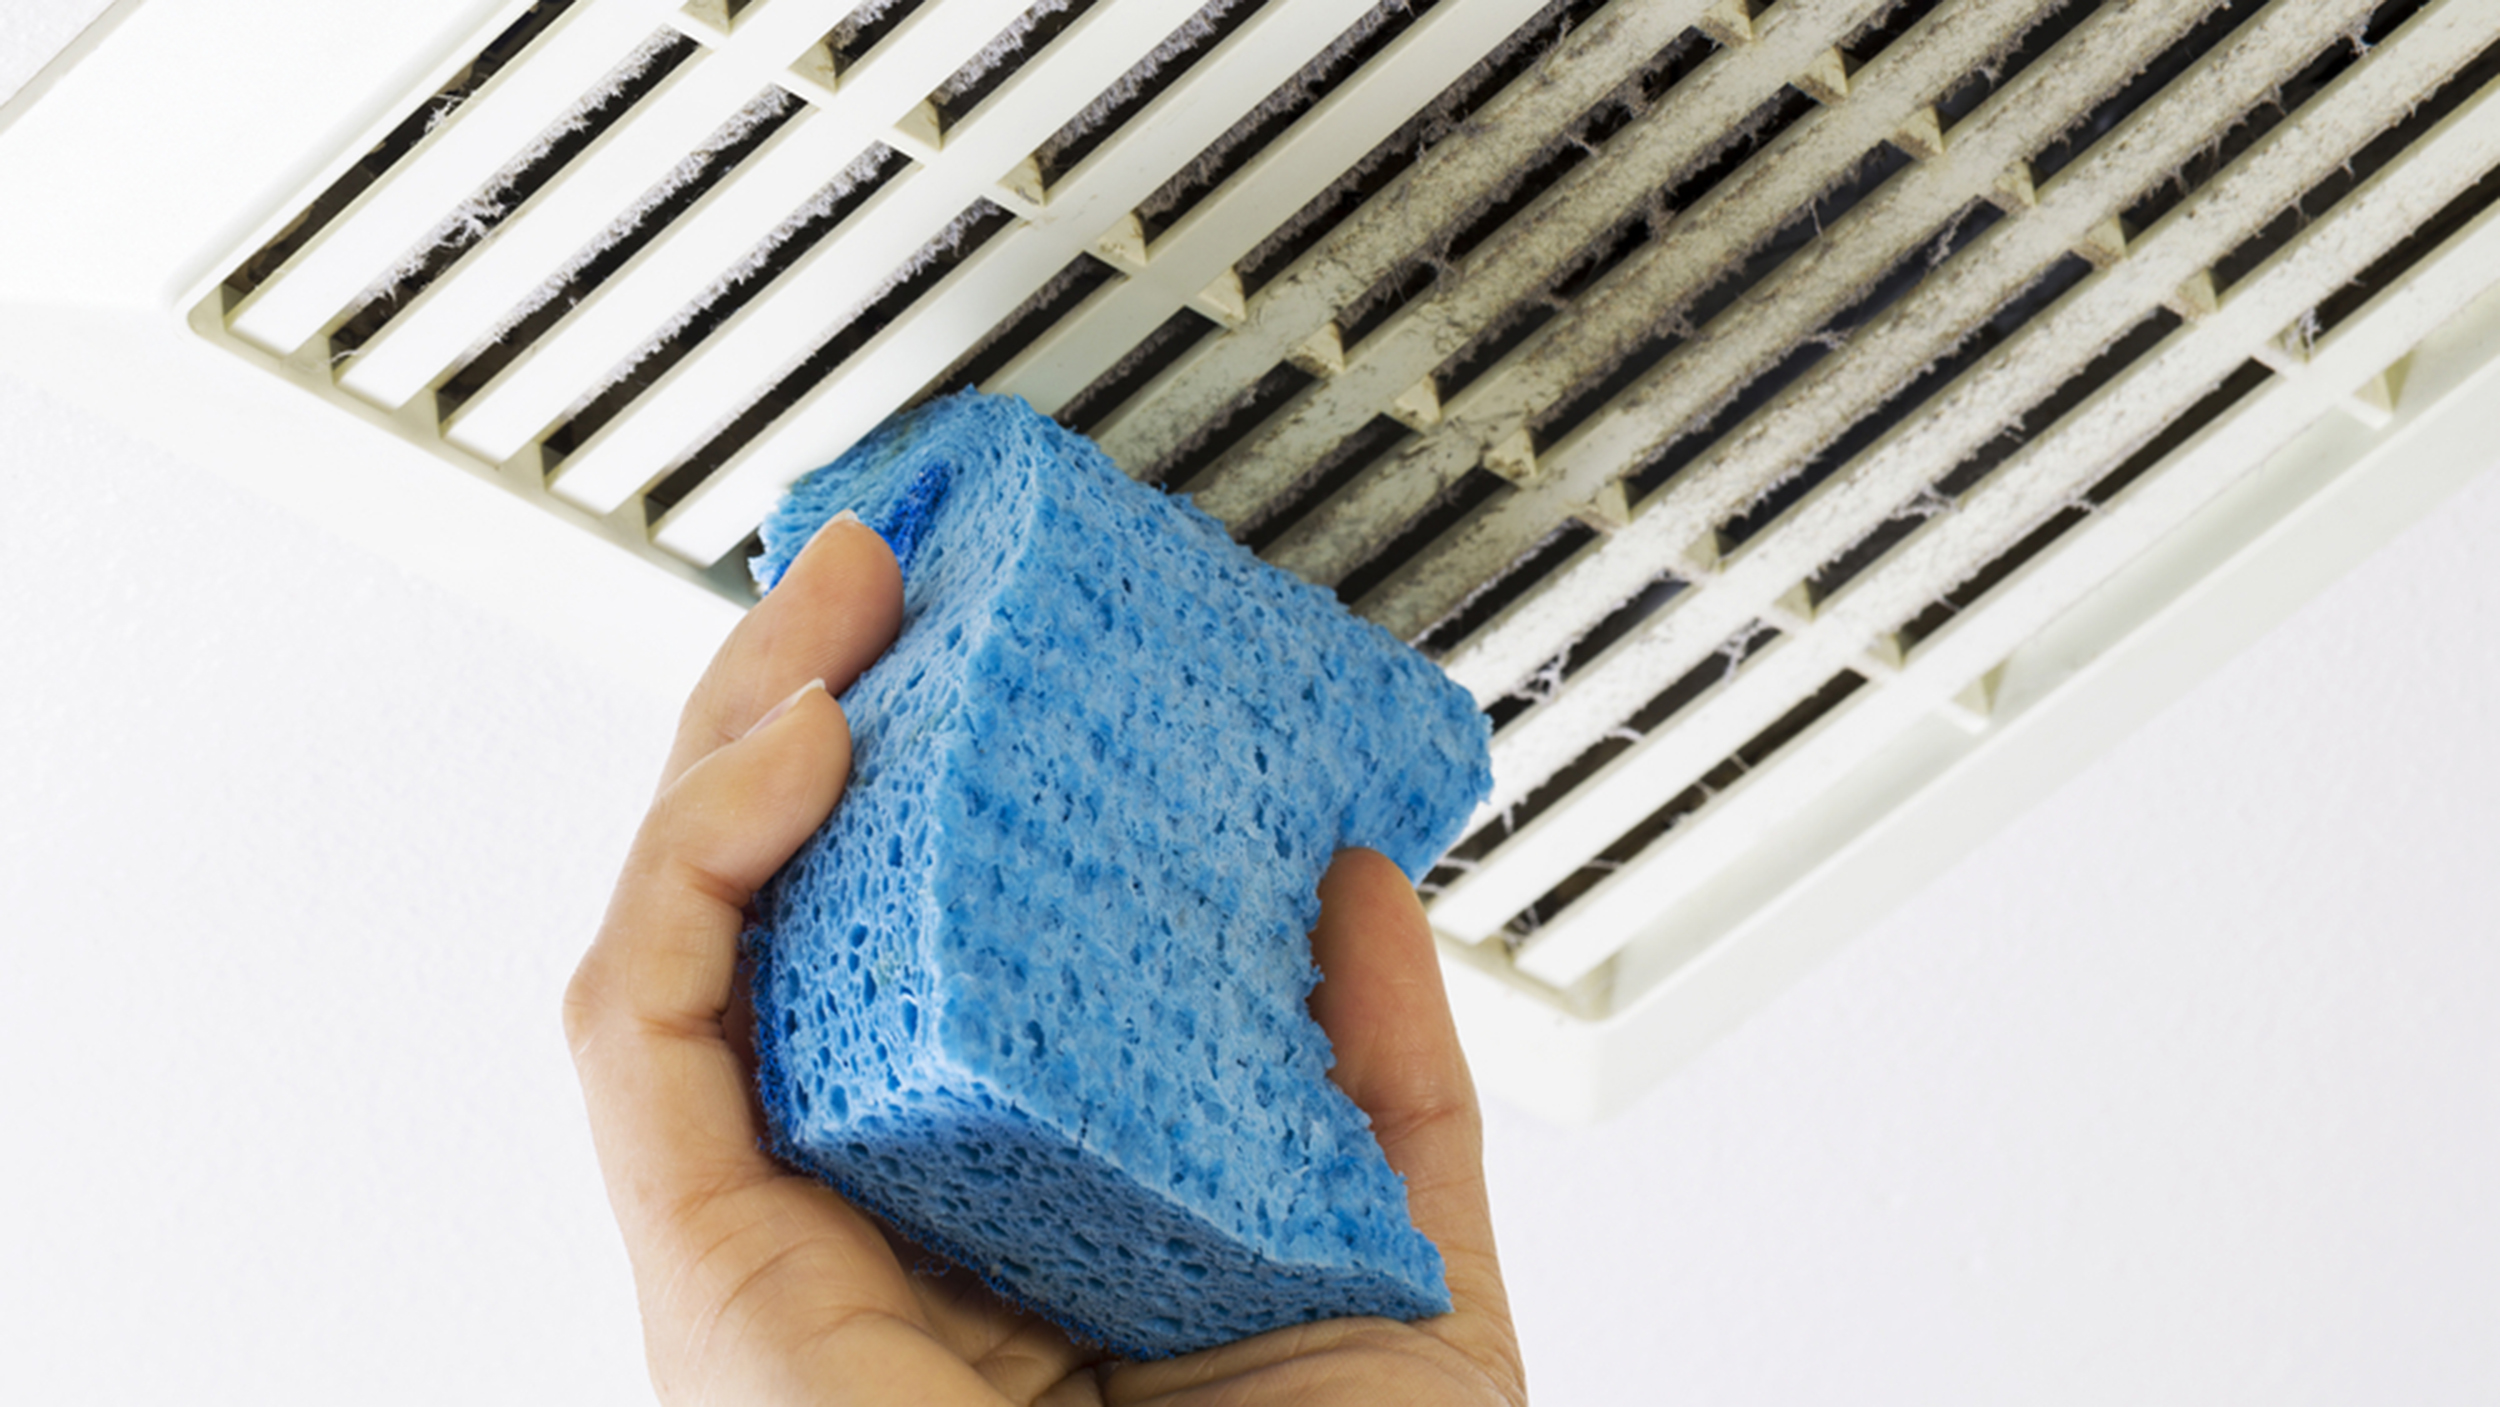 So, make sure you clean the vents regularly.